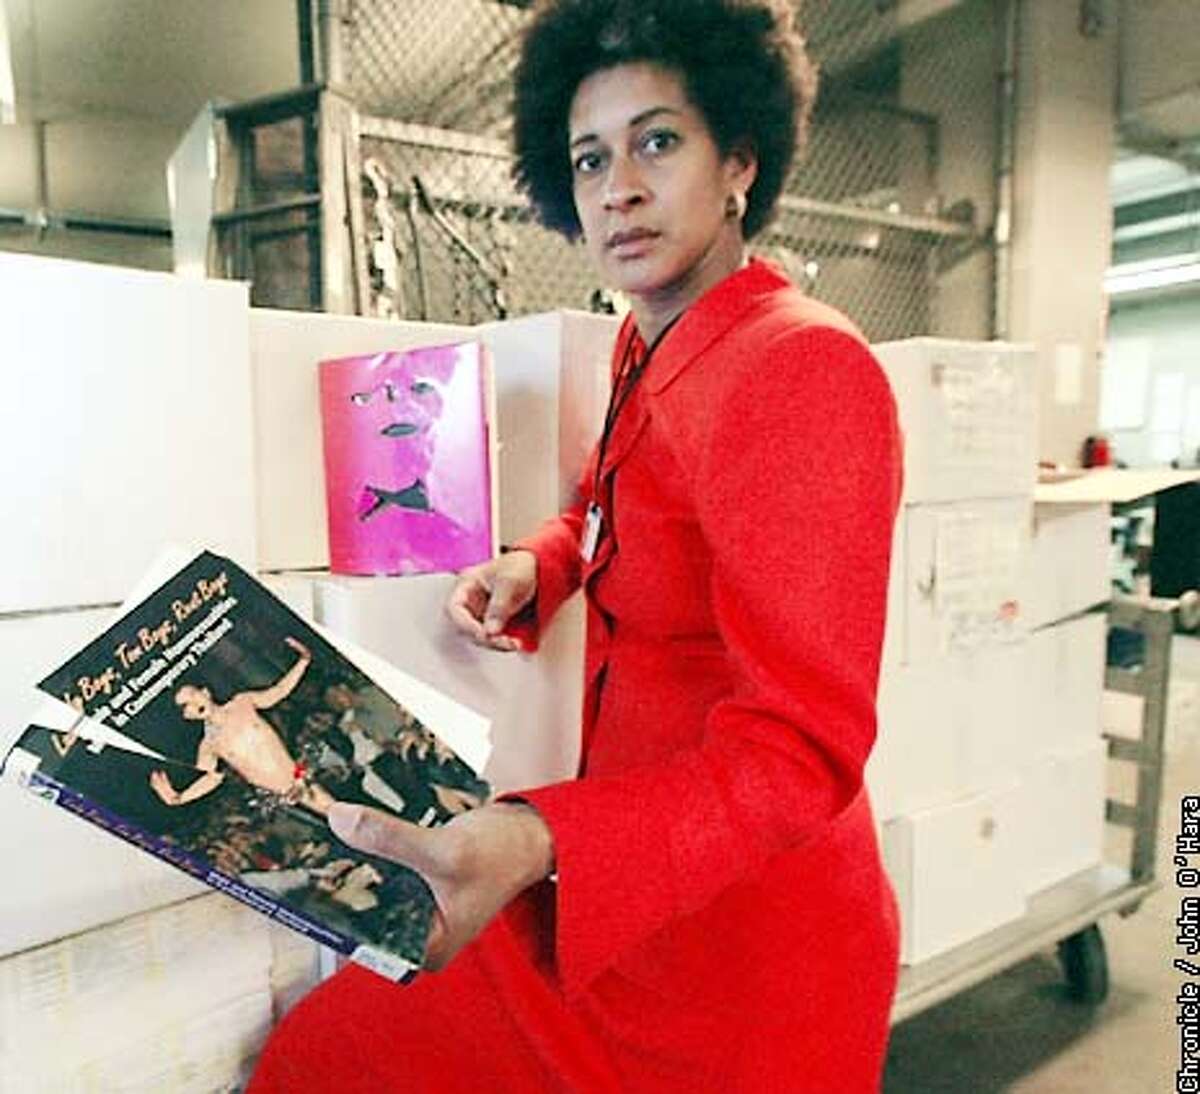 Police Inspector Milanda Moore show two books that were vandalized at the Libary by John Perkyns. He vandalized more than 600 books in all. Moore is holding a title "Becoming Visible An illistrated history of lesbian and gay life in the twenteth century. photo taken in the hall of Justice property room. Photo/John O'Hara